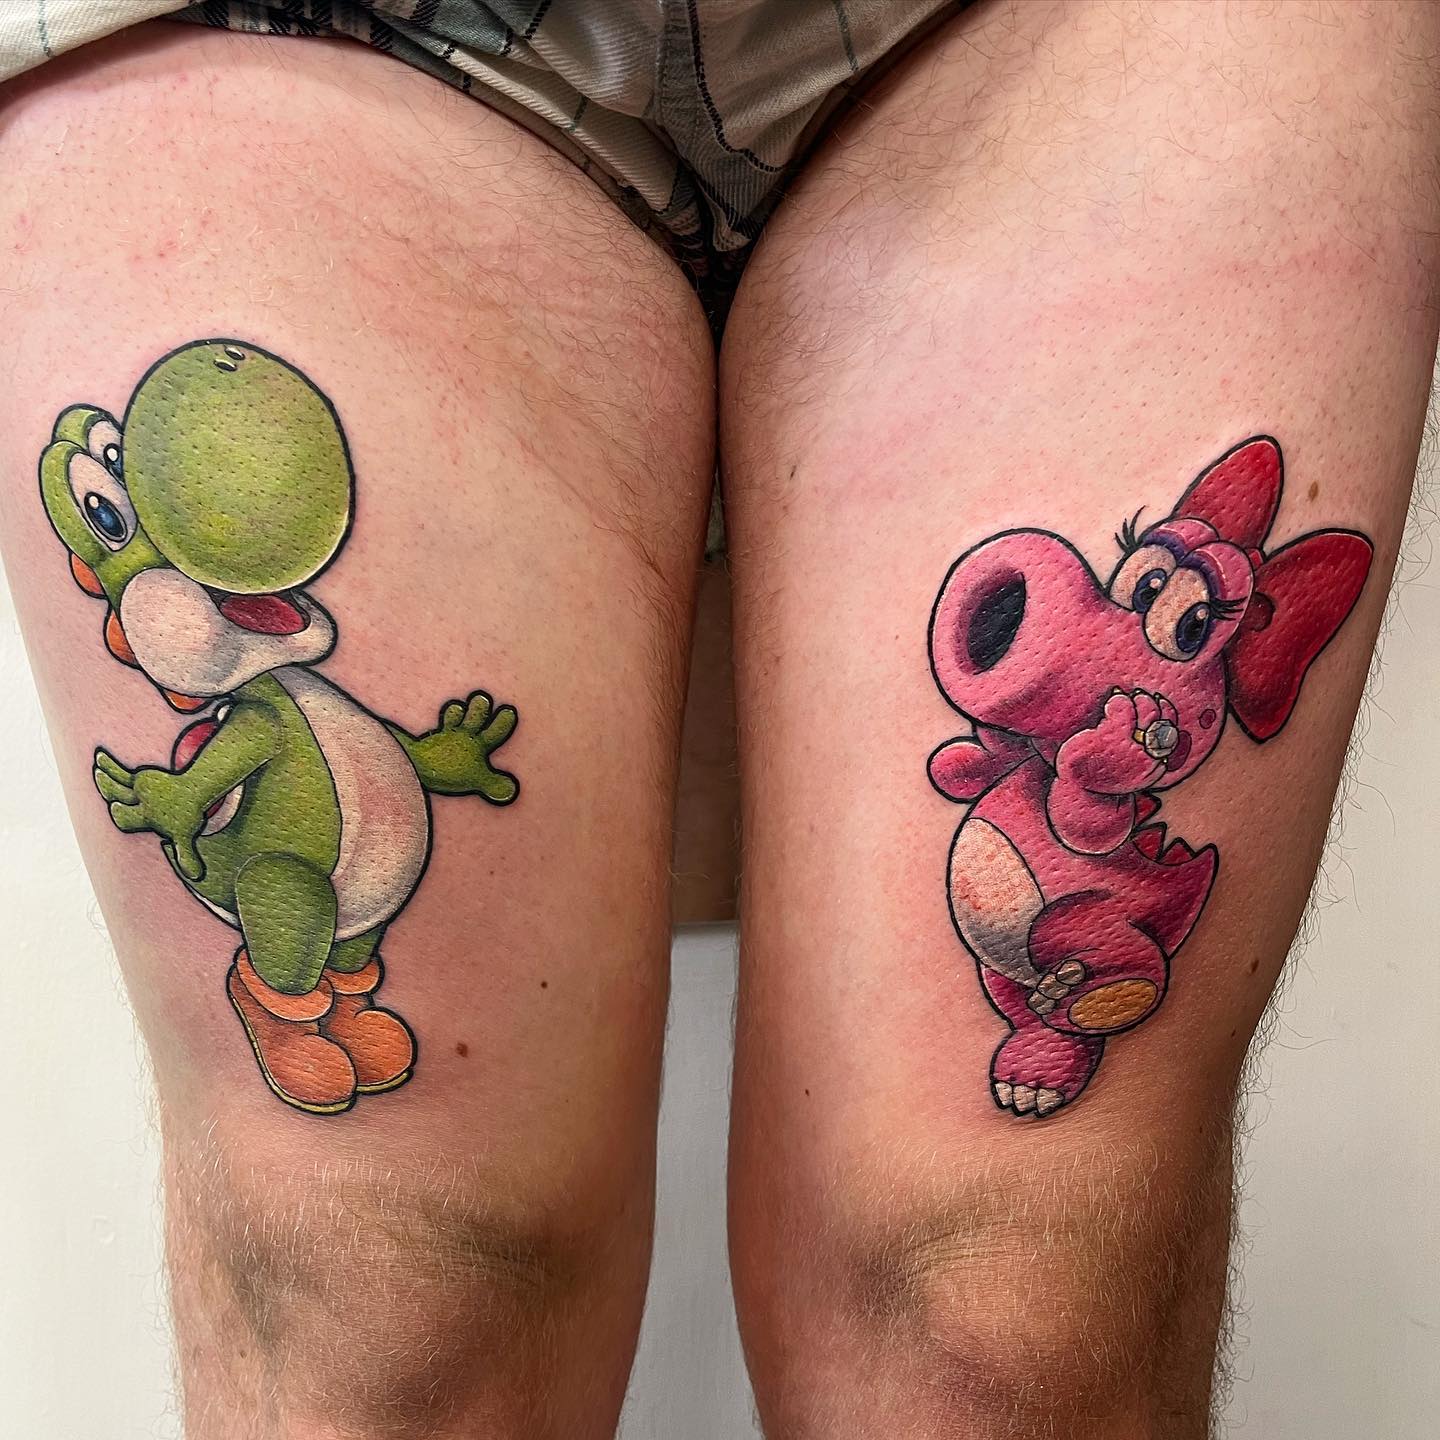 Yoshi and Birdo in one session for the most lovely Alan thank you so much, I had such a lovely day chatting and tattooing these guys. They are so fun!

              